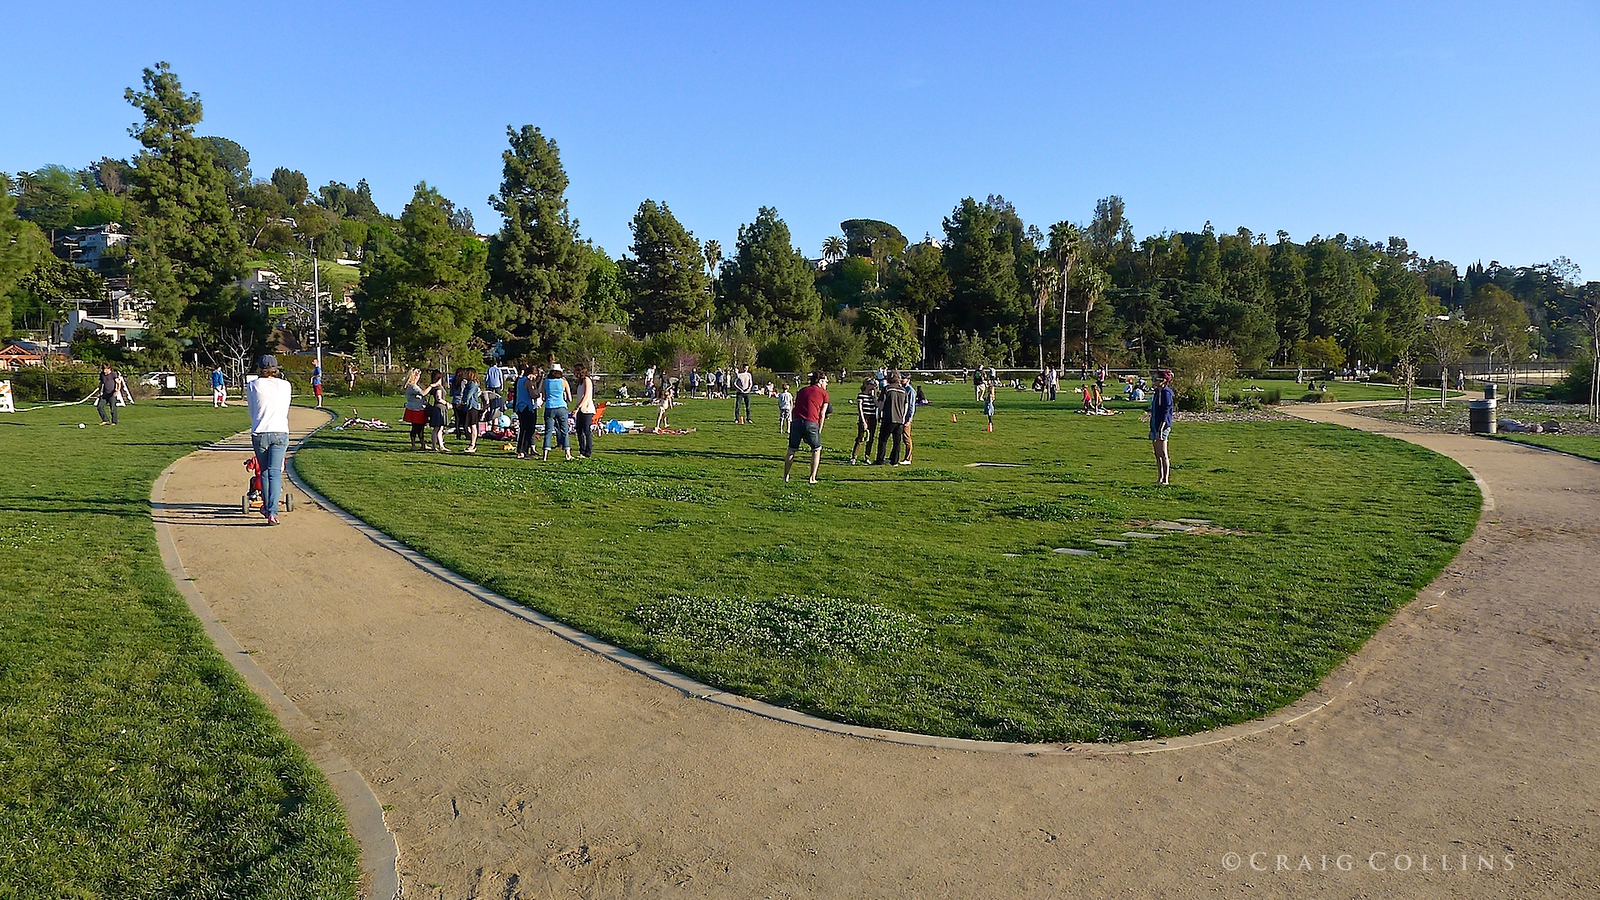 In 2011, the Meadow opened as a "quiet park."